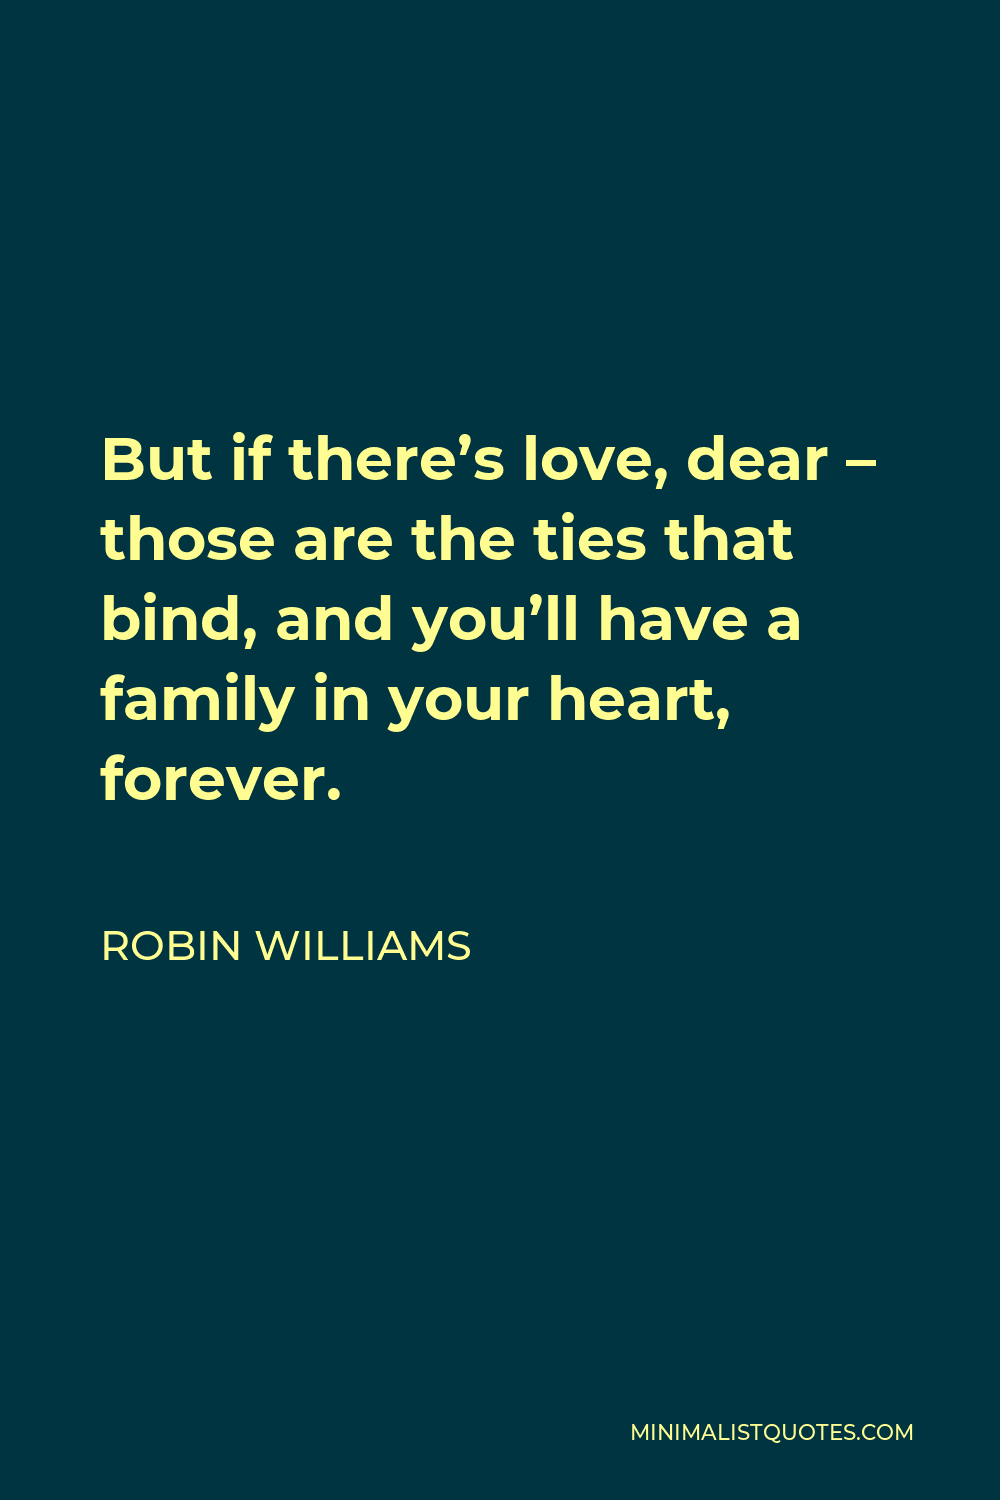 Robin Williams Quote - But if there’s love, dear – those are the ties that bind, and you’ll have a family in your heart, forever.